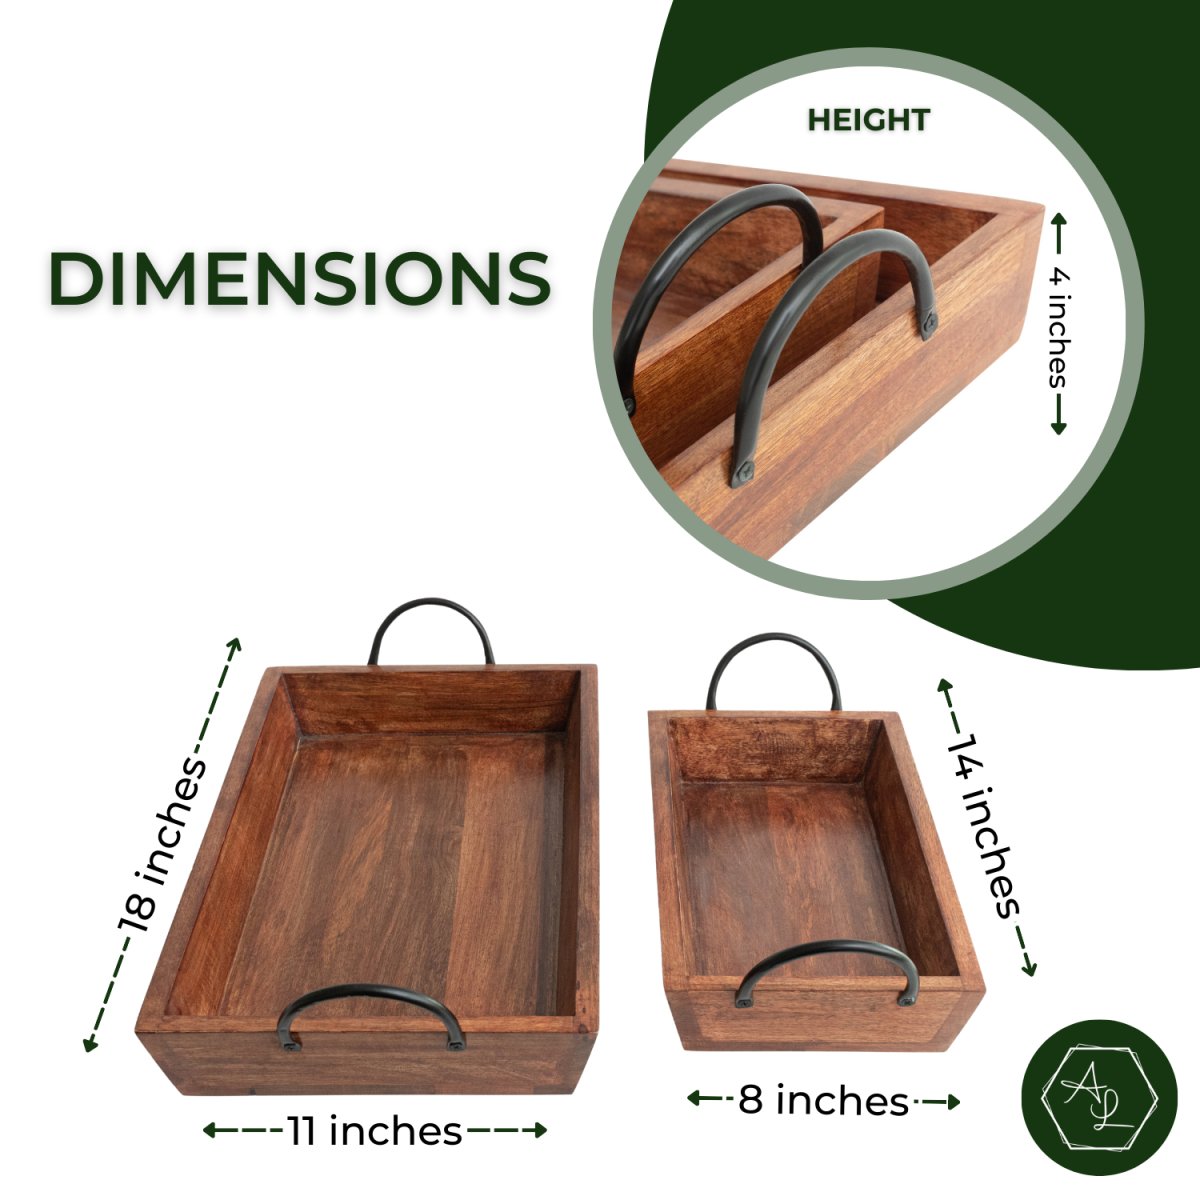 Rectangular Wooden Serving Trays with Black Metal Handles, Set of 2, dimensions image - Aesthetic Living